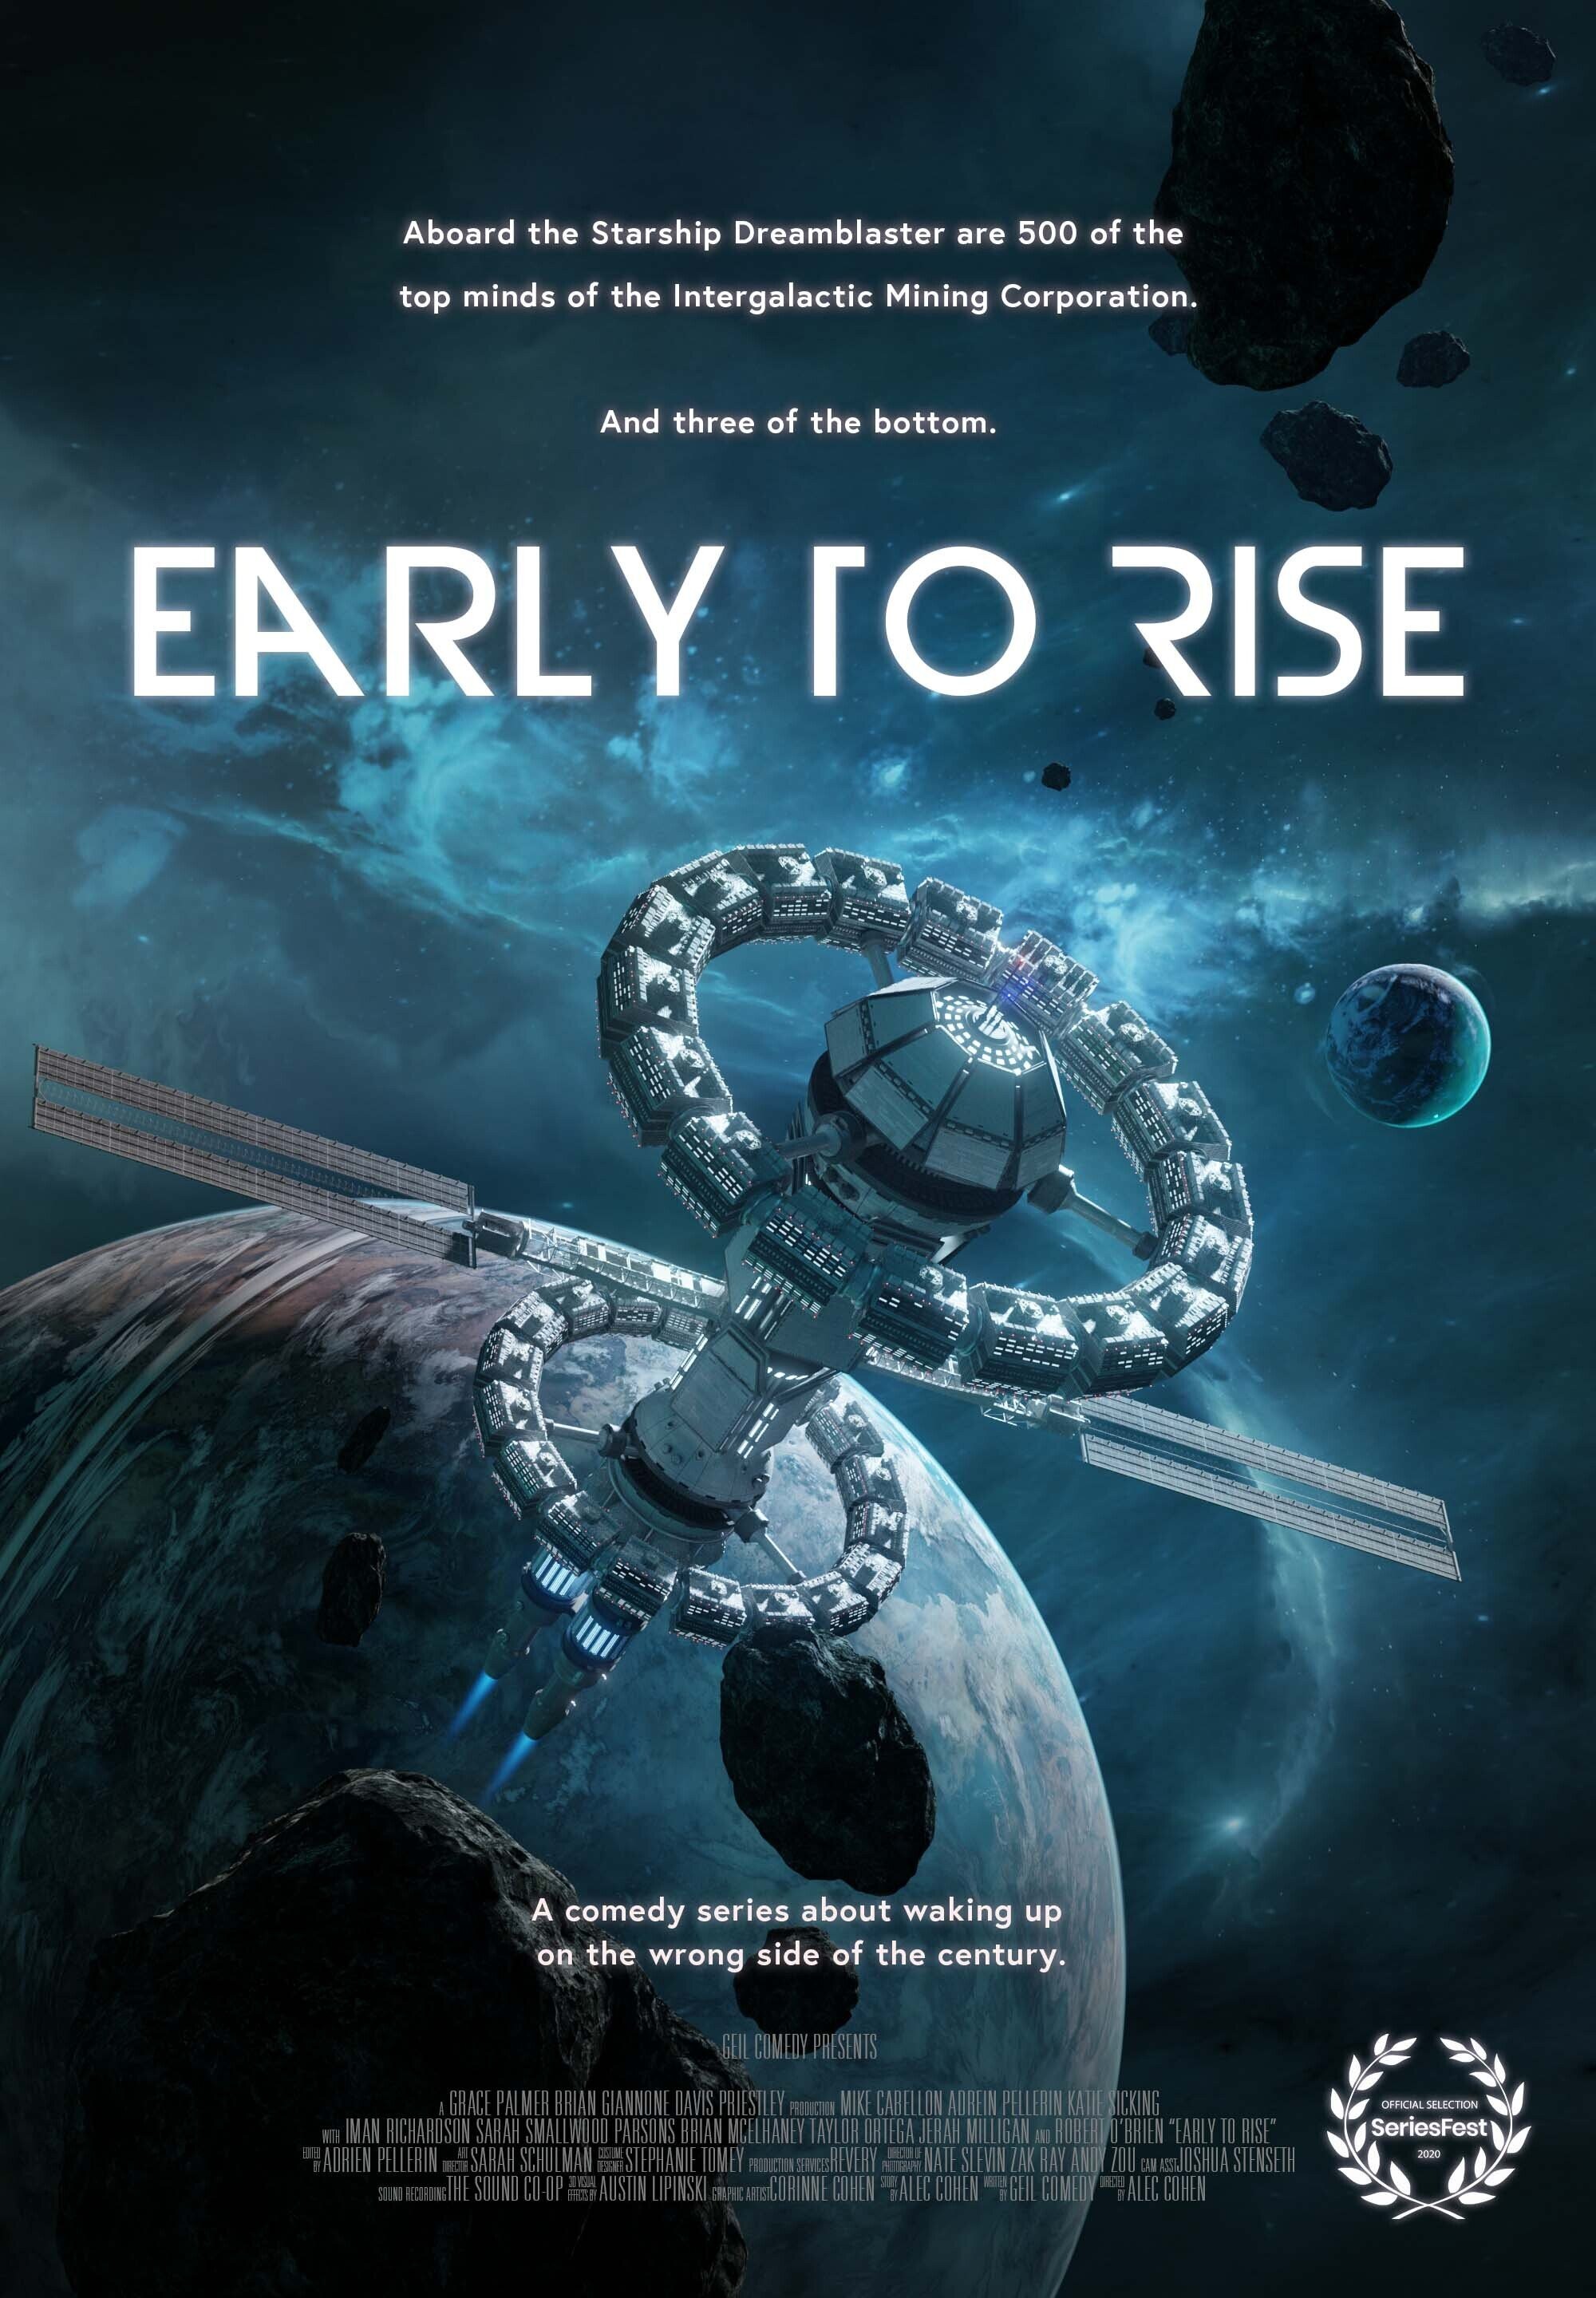 "Early To Rise" wins Audience Award at SeriesFest